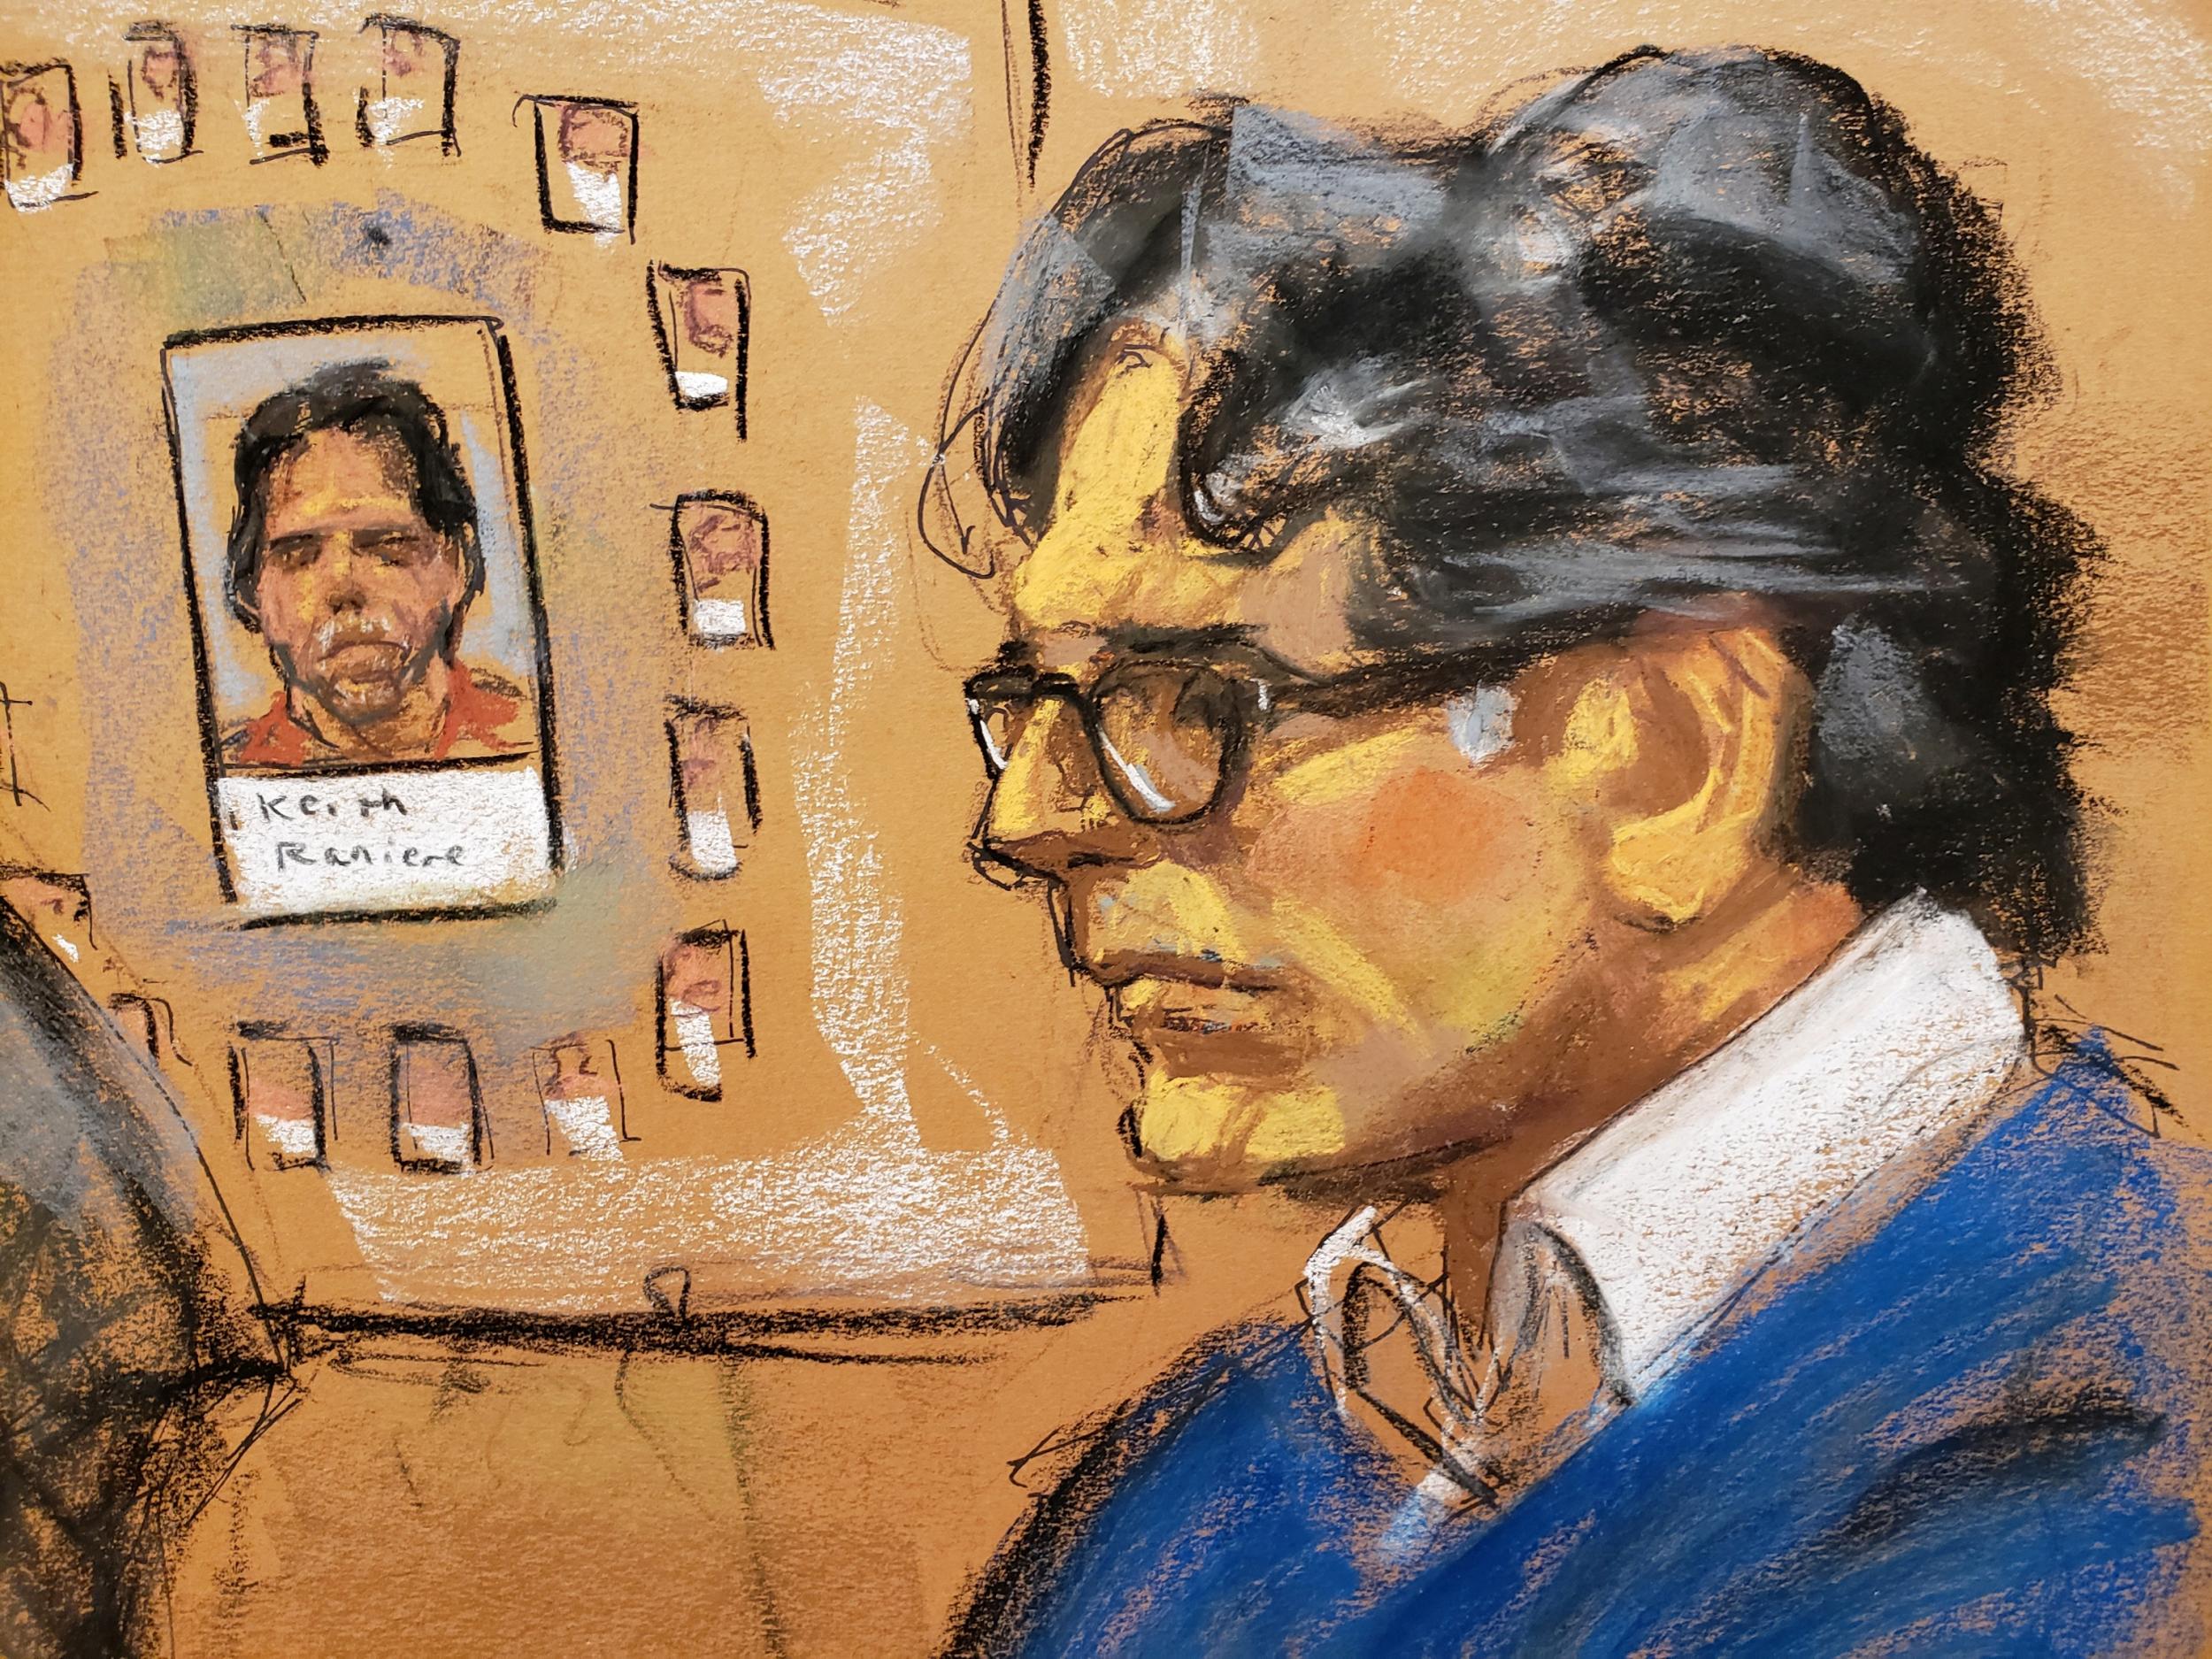 Nxivm trial: Sex cult leader found guilty on all counts of sex trafficking and racketeering